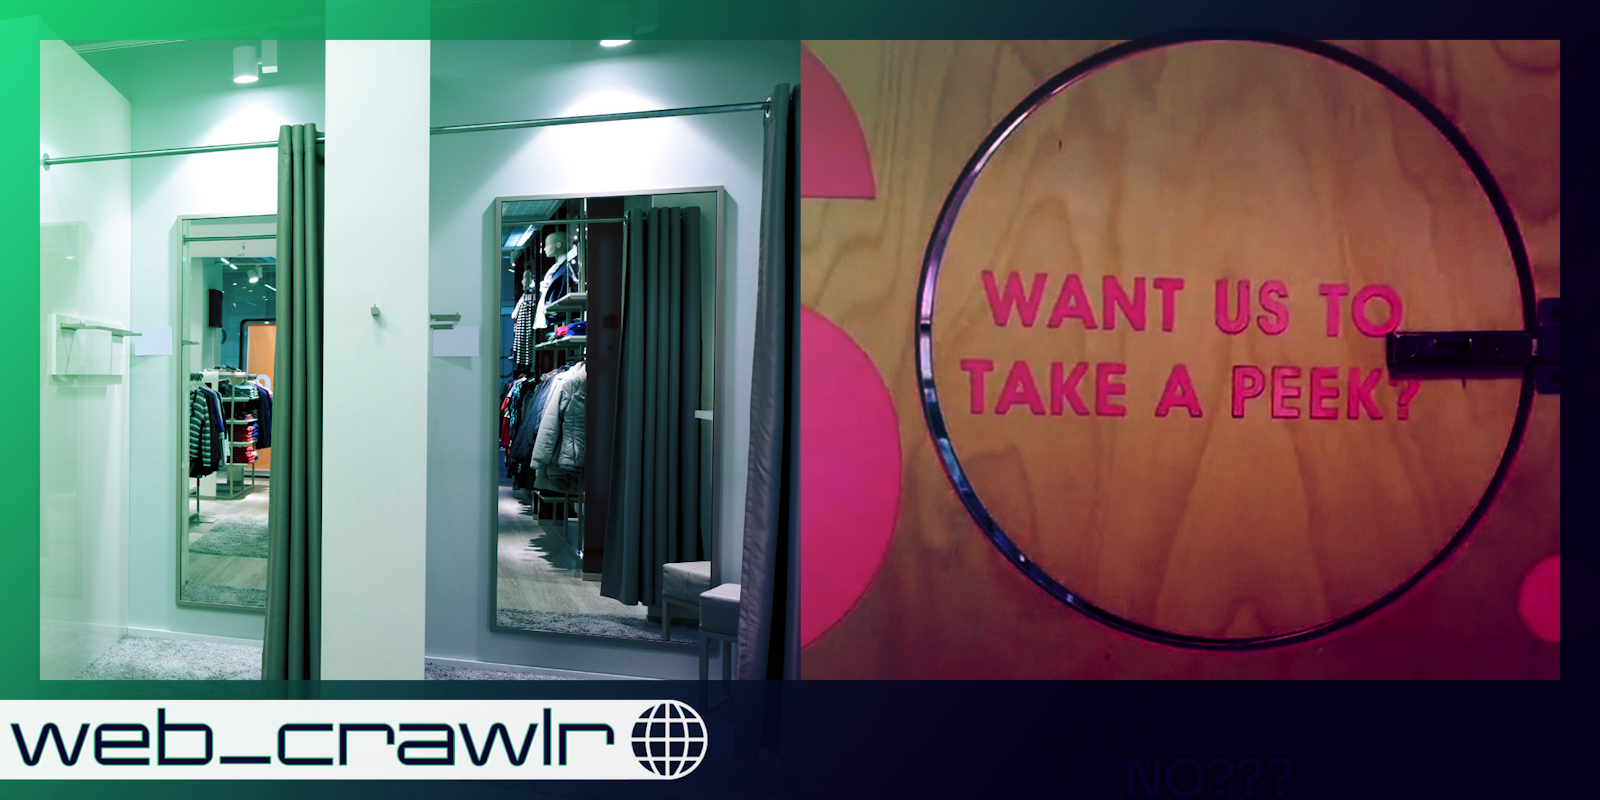 Two dressing rooms in a retail establishment next to a sign that says 'Want Us To Take A Peek'. The Daily Dot newsletter web_crawlr logo is in the bottom left corner.